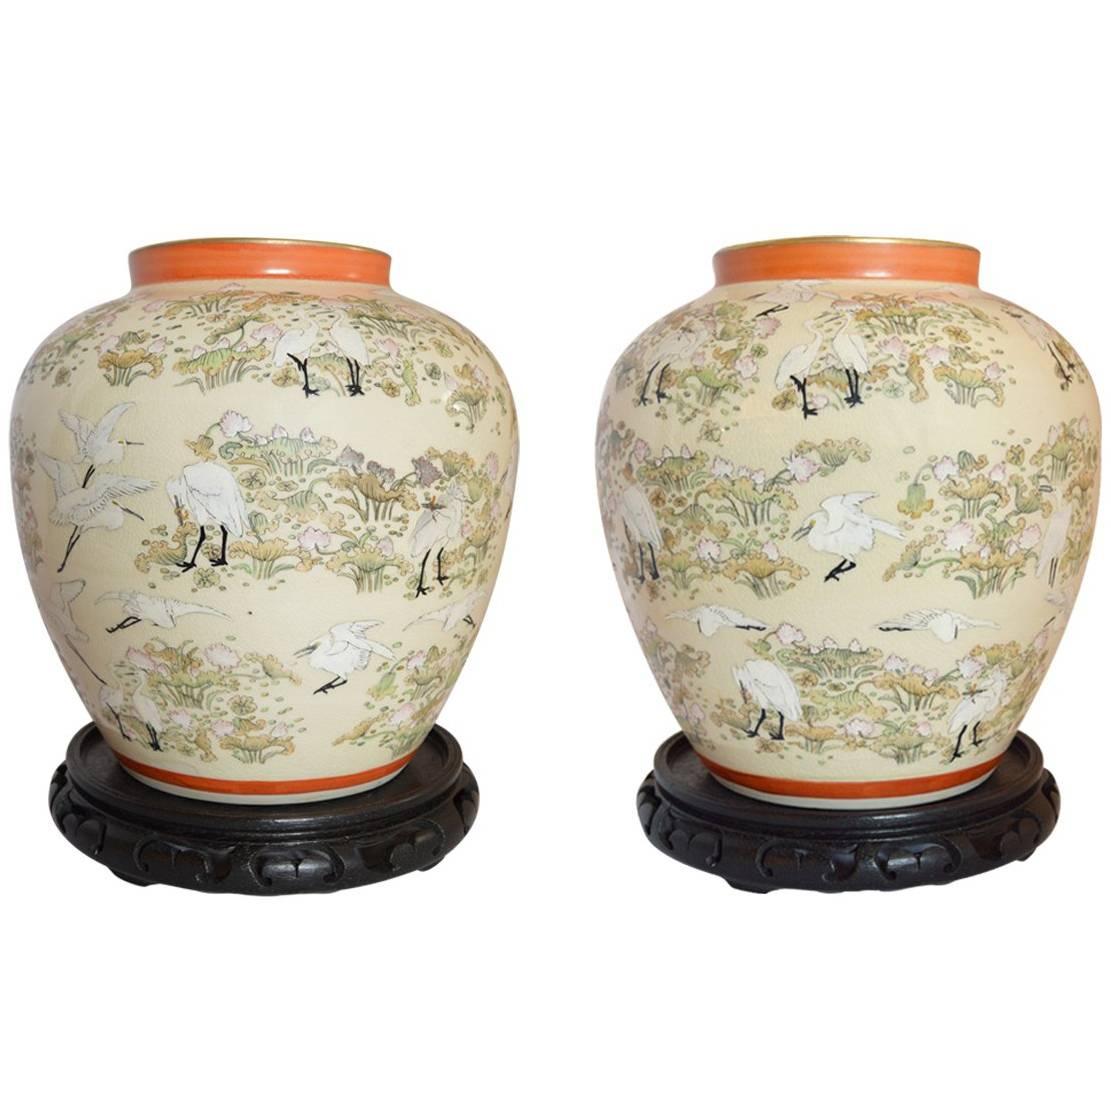 Pair of Antique Japanese Satsuma Jars with Stands